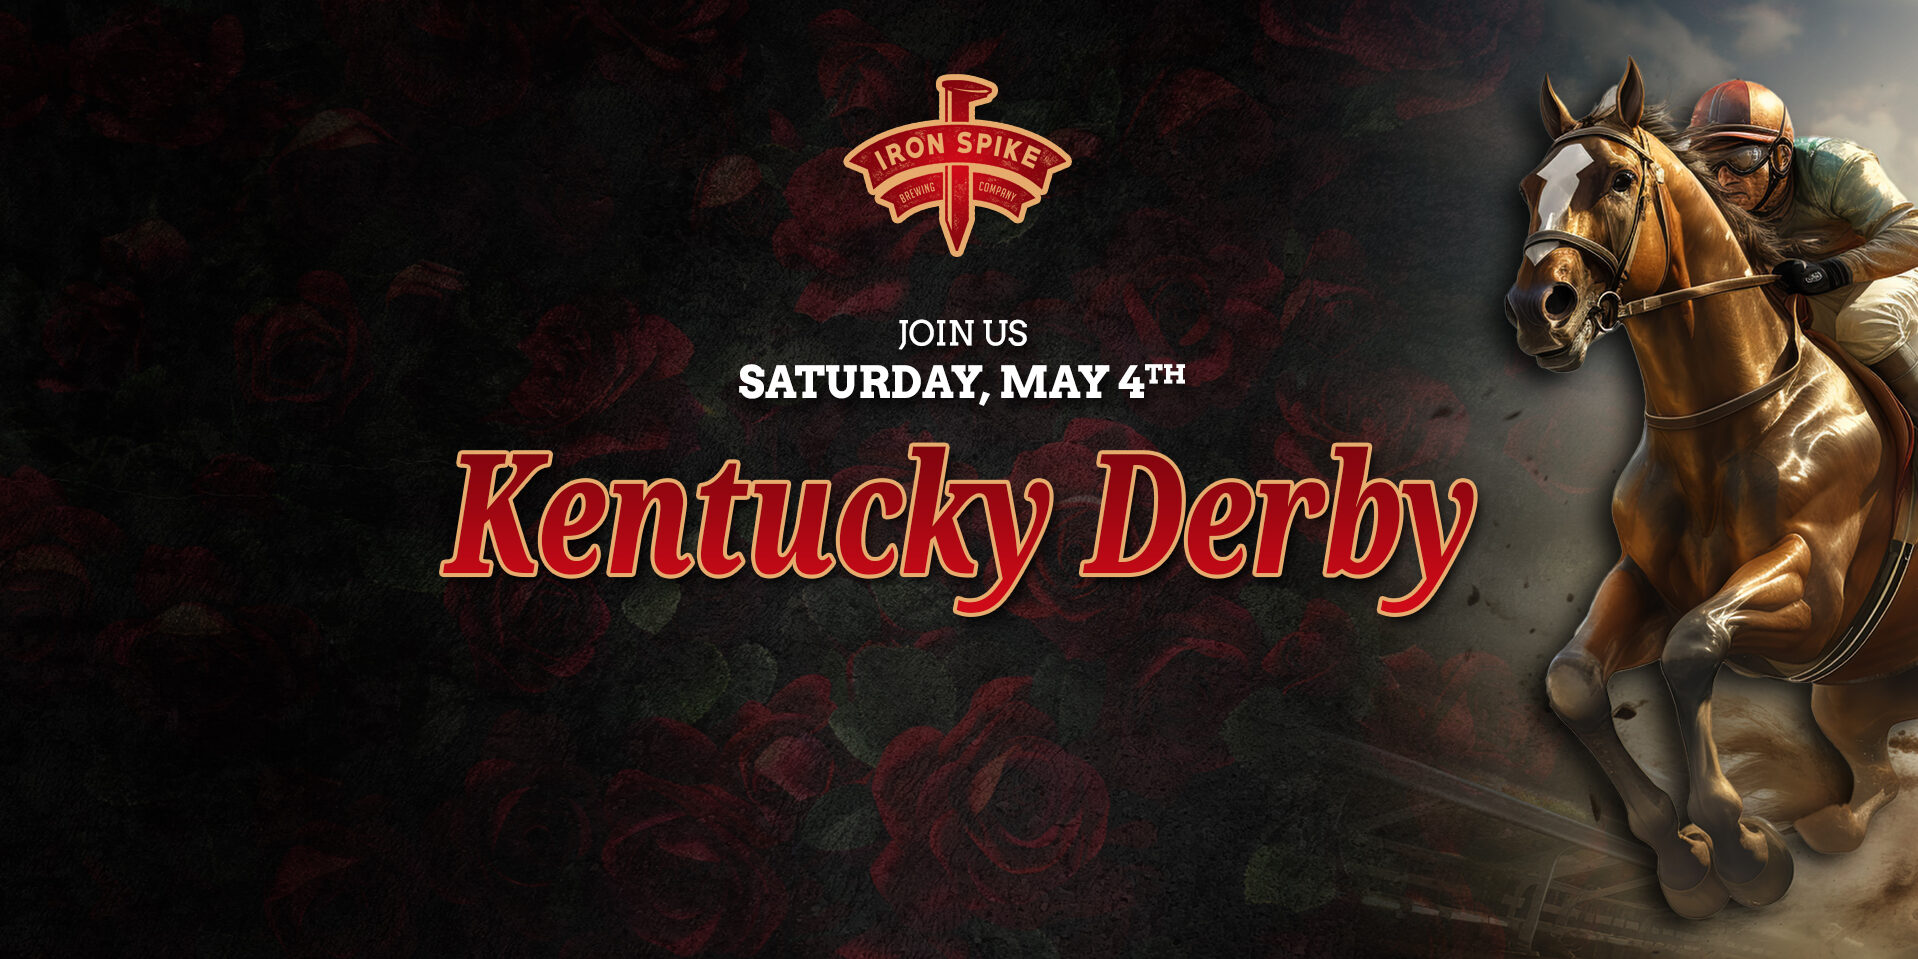 Join Us Saturday, May 4th for Kentucky Derby